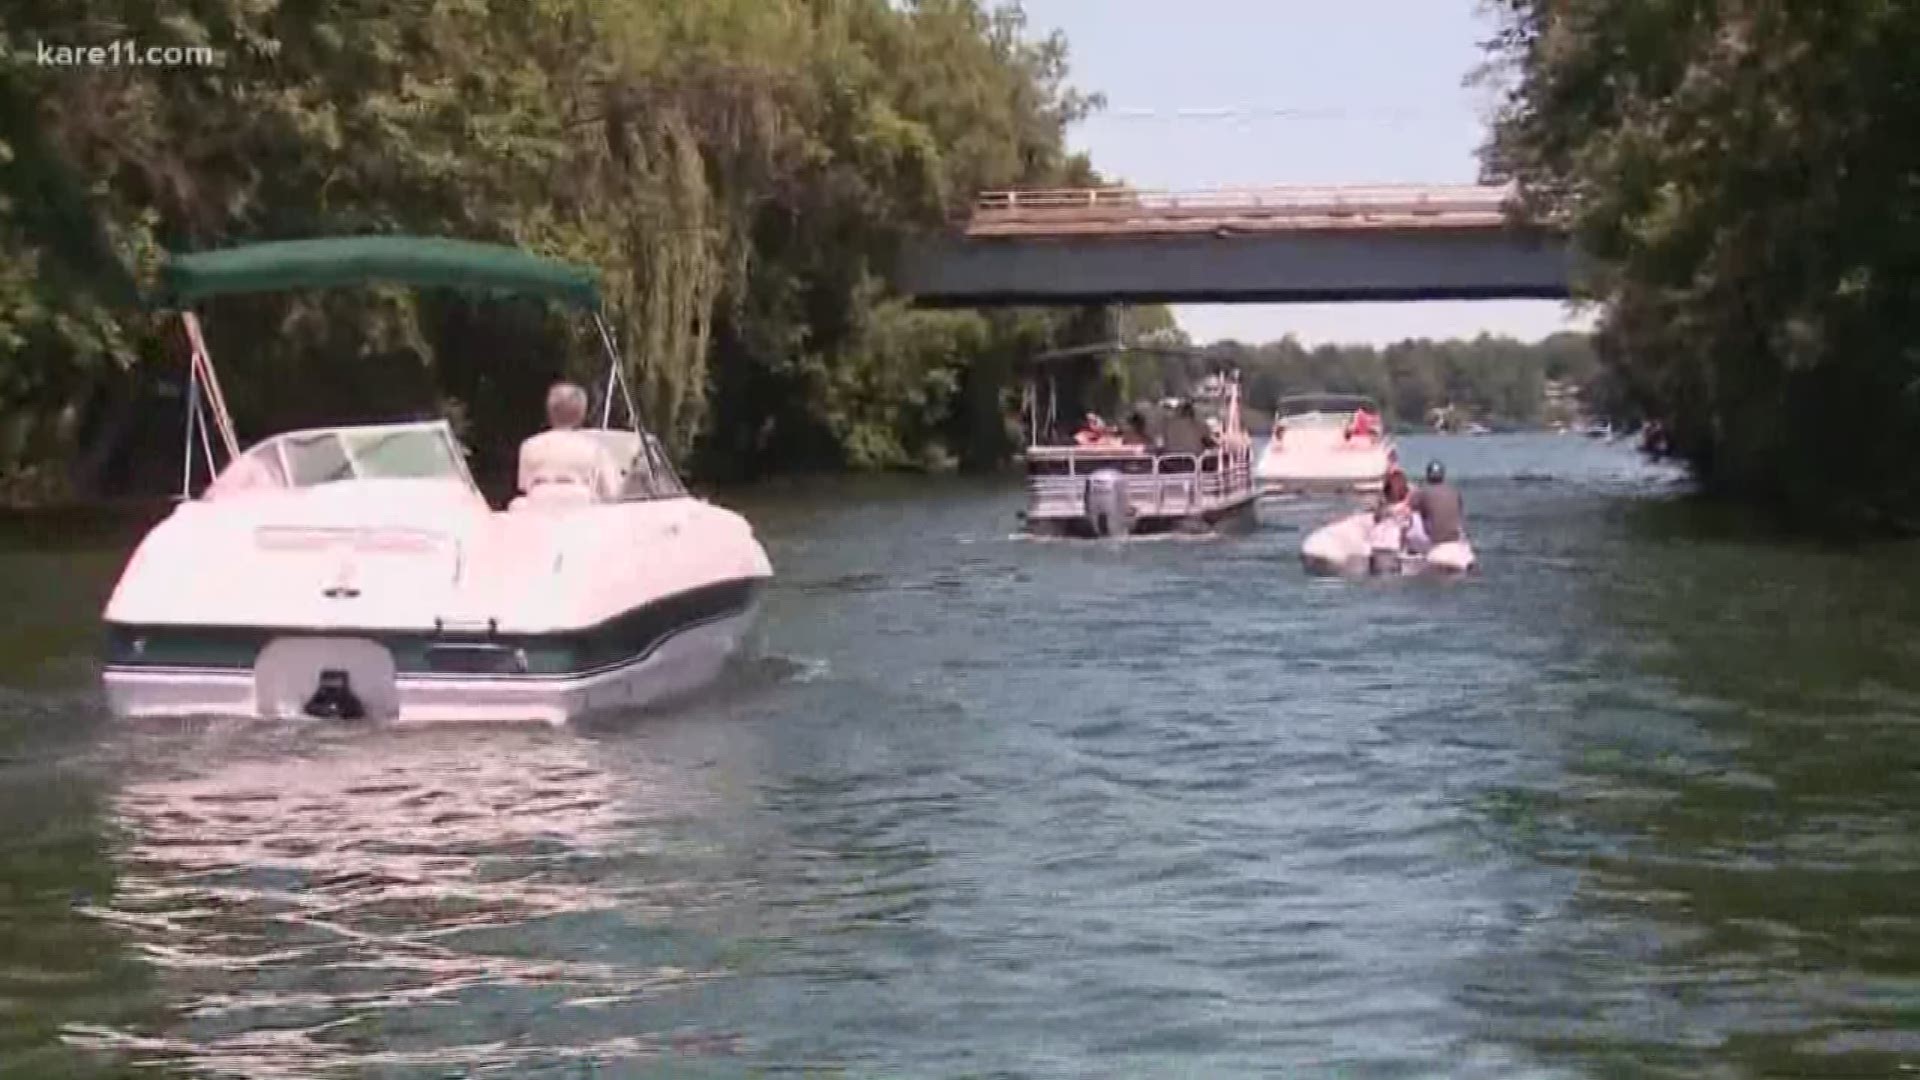 VERIFY: Can you drink alcohol while boating?